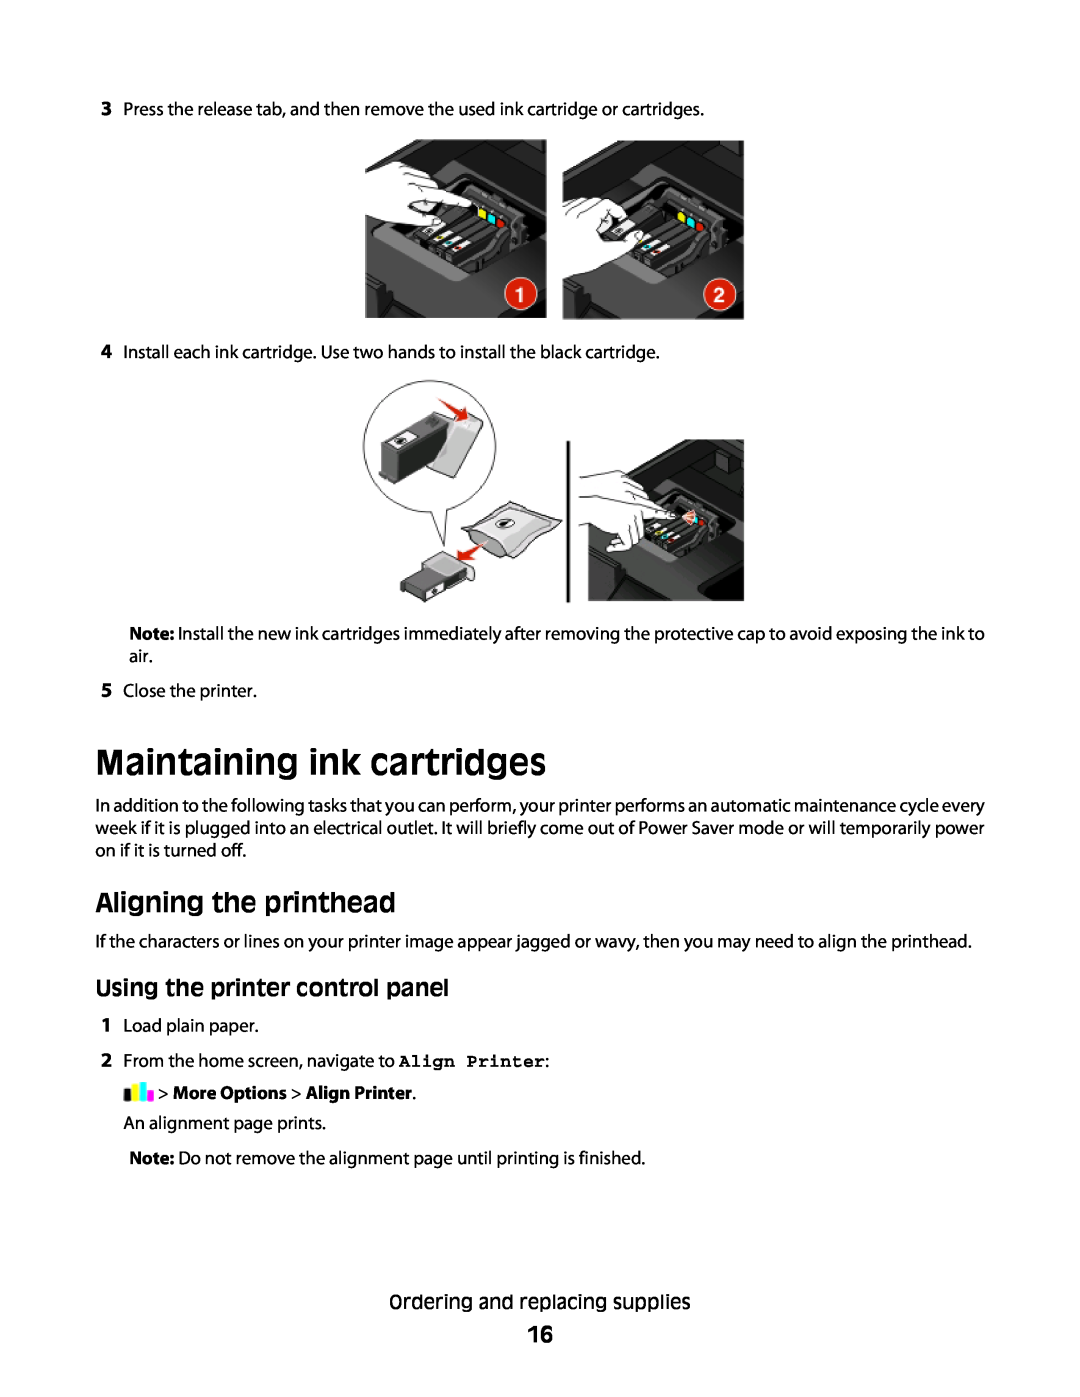 Lexmark S600 manual Maintaining ink cartridges, Aligning the printhead, Using the printer control panel 